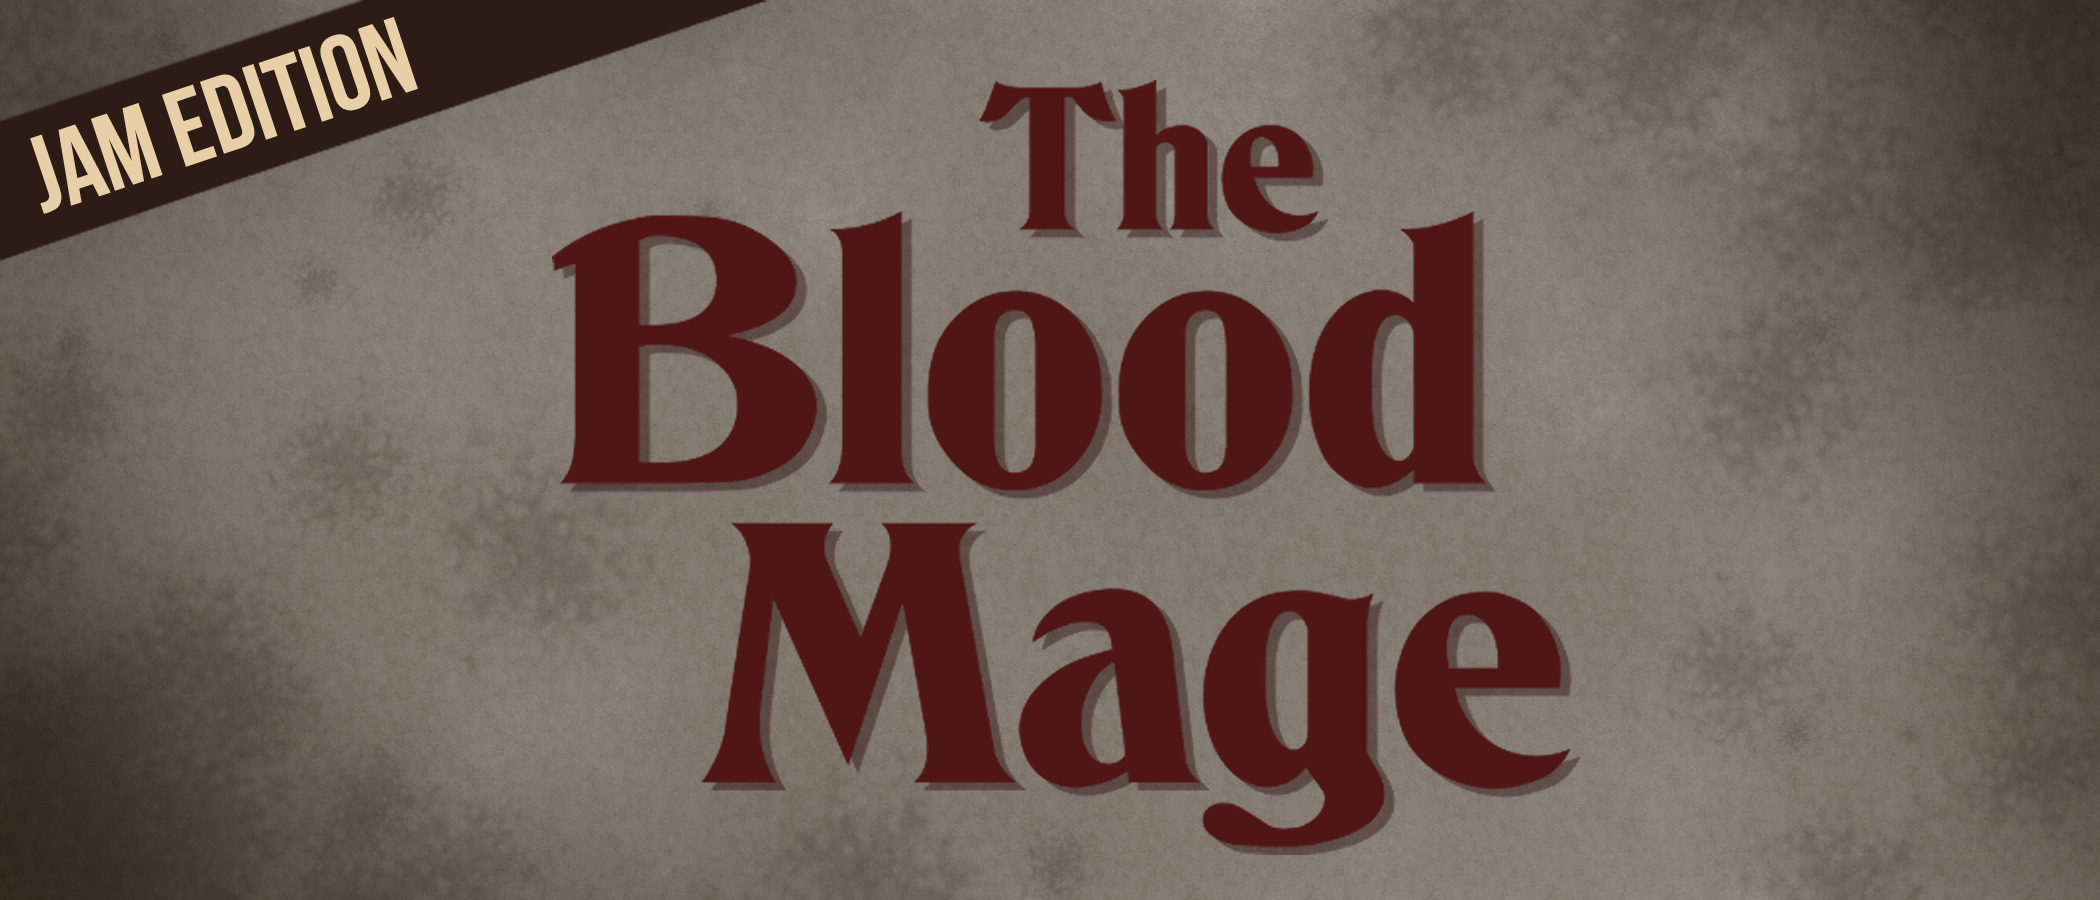 The Blood Mage (Jam Edition)